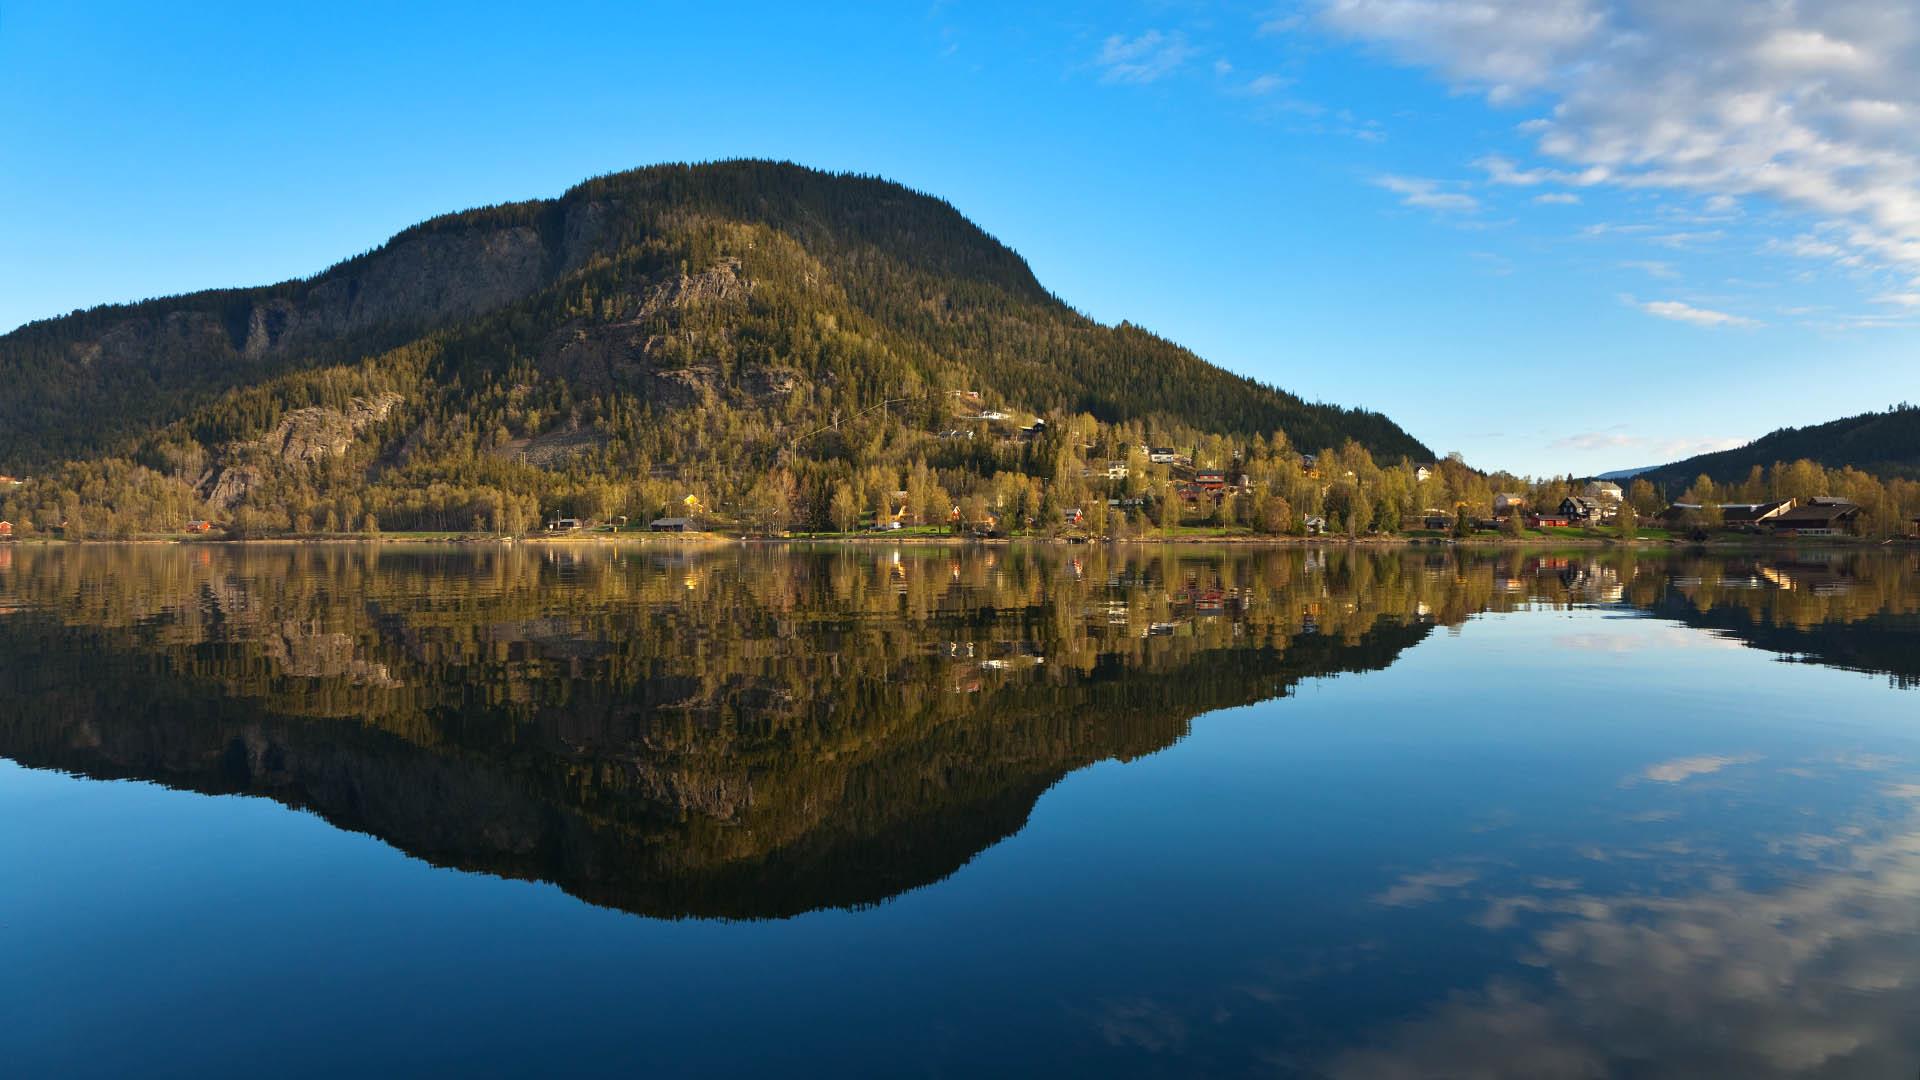 The small town of Fagernes seen from the lake, with a forested hill beyond the town that is mirrored on the blank surface of the water. Blue sky.